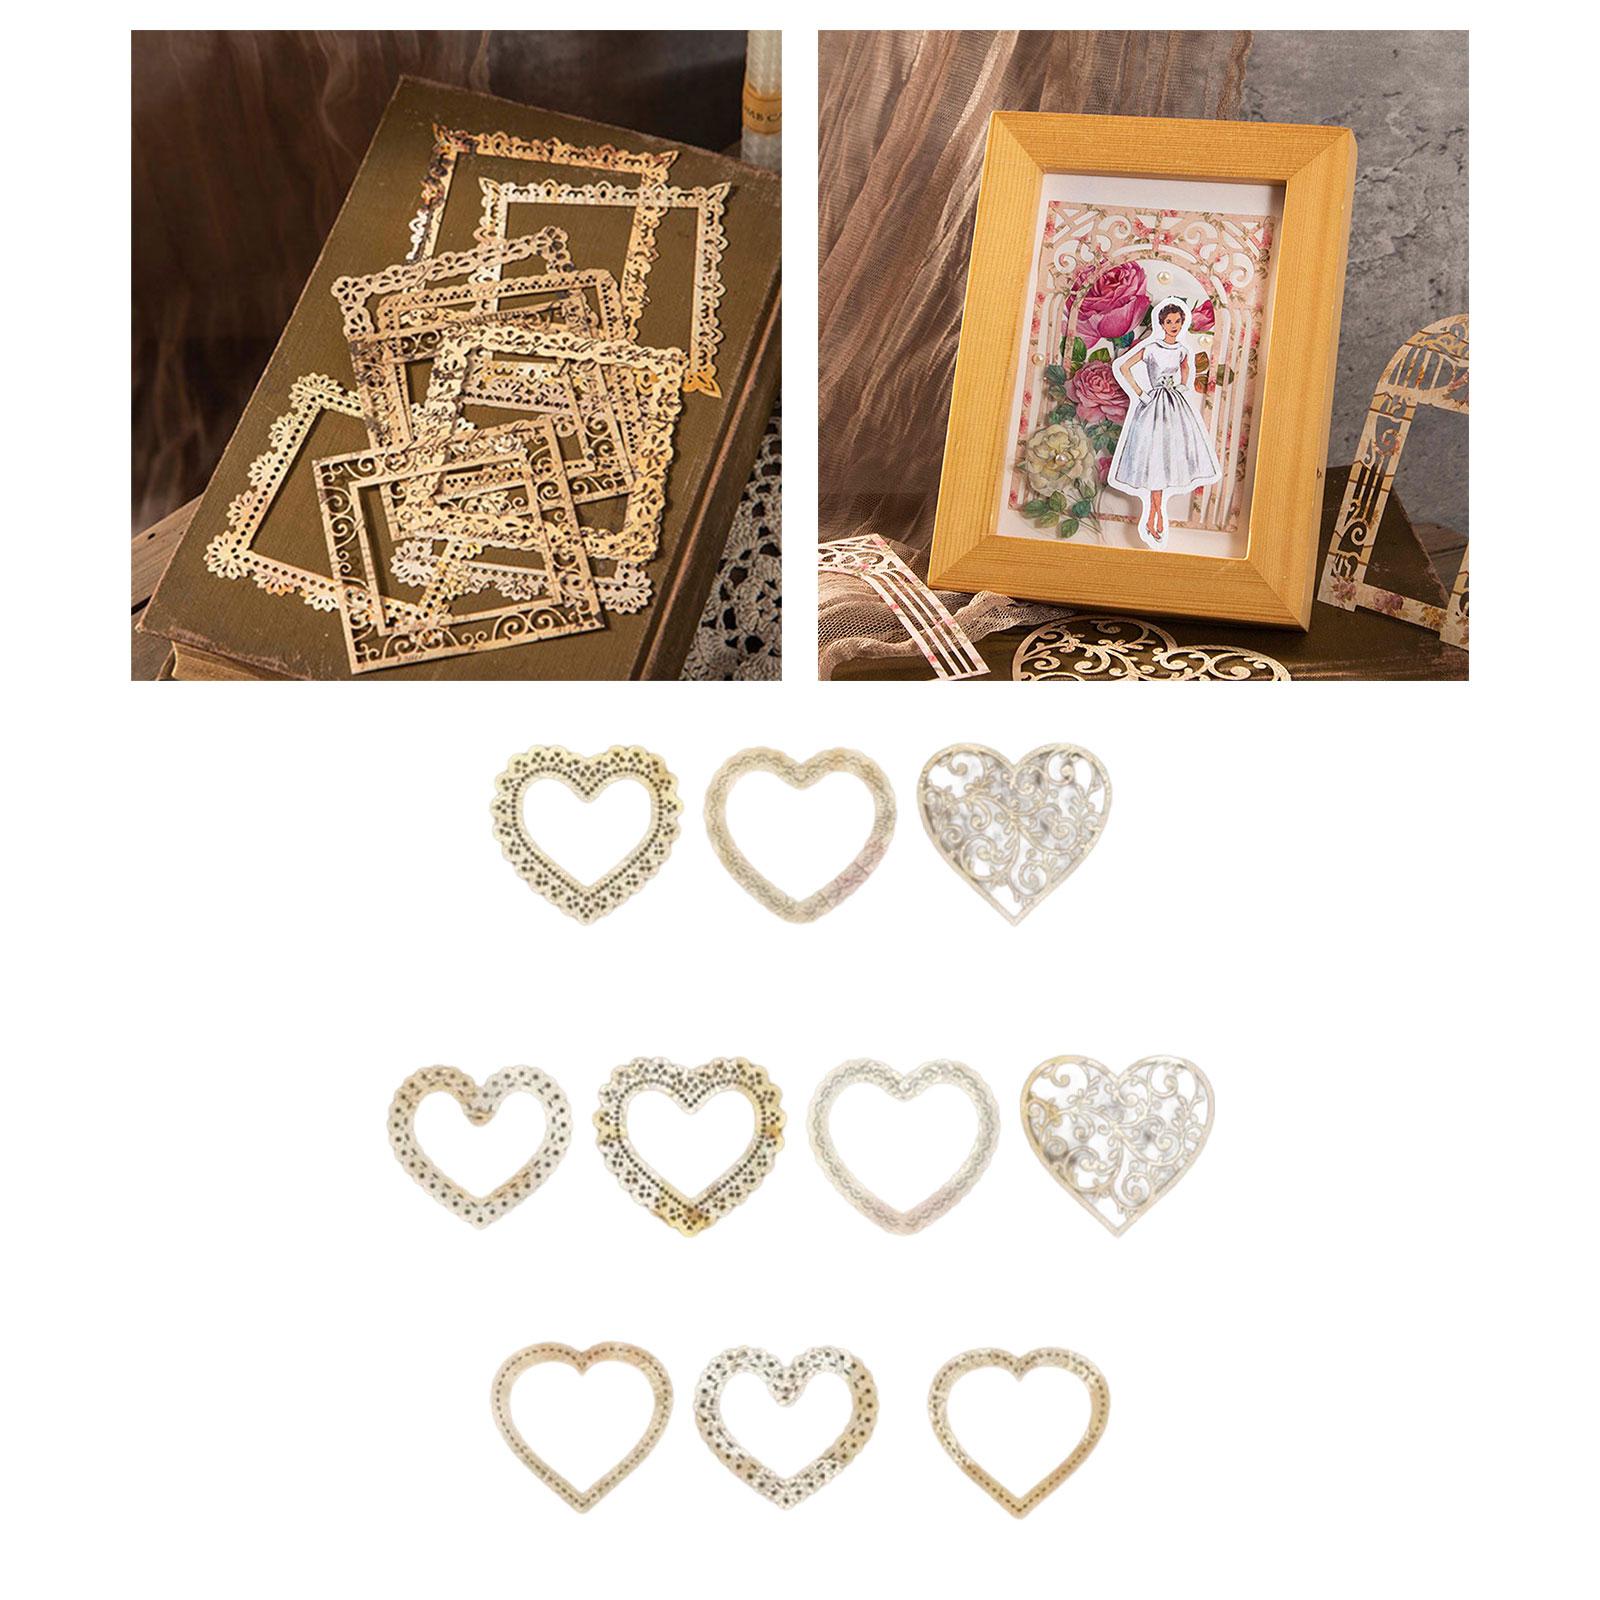 Decor Frame Scrapbooking Paper Craft Supplies for Card Making Planner Diary Heart